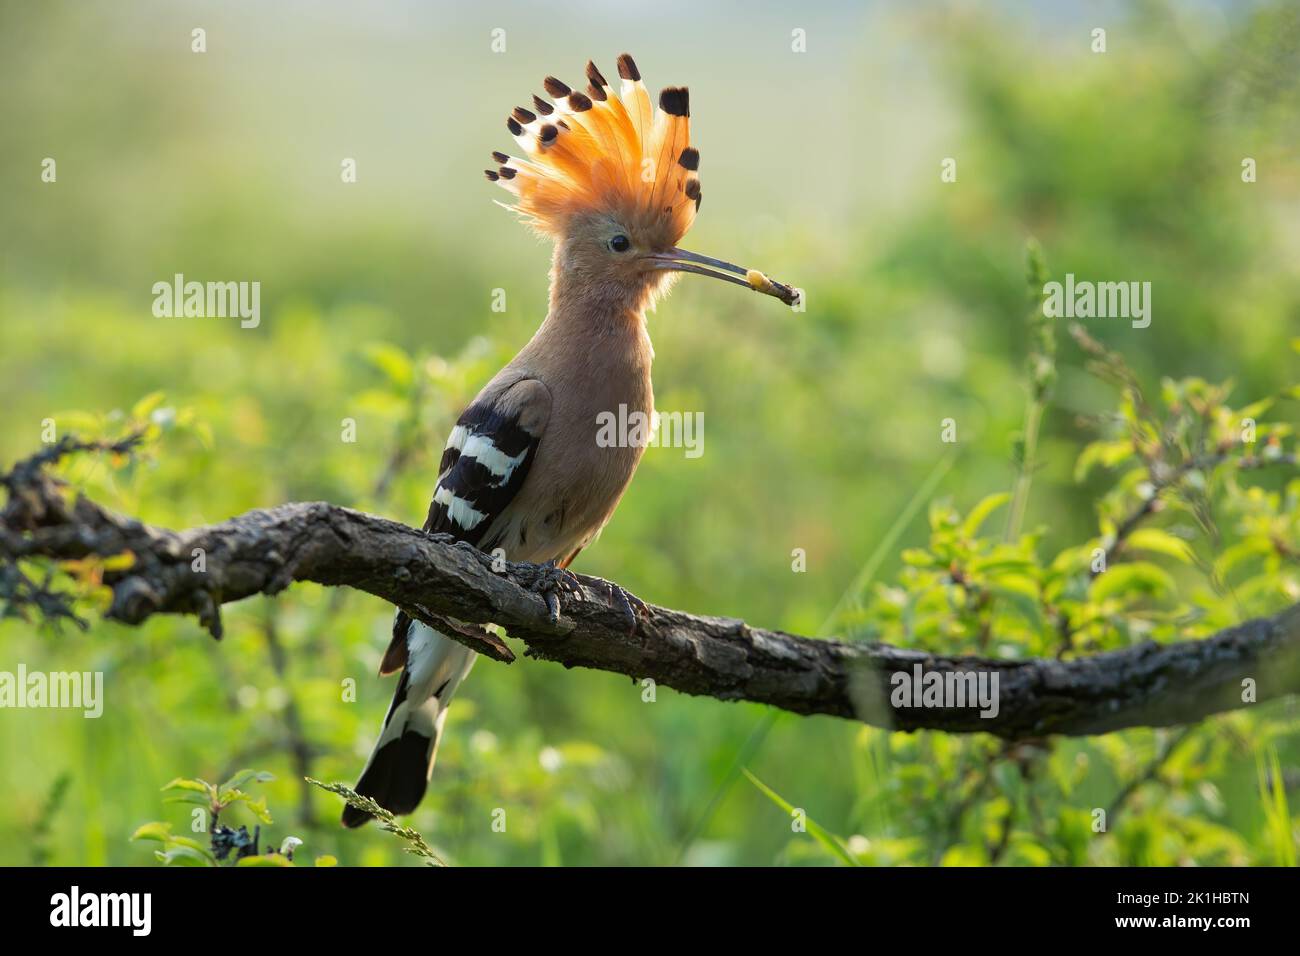 Eurasian hoopoe sitting on a branch with a worm in beak in summer forest Stock Photo